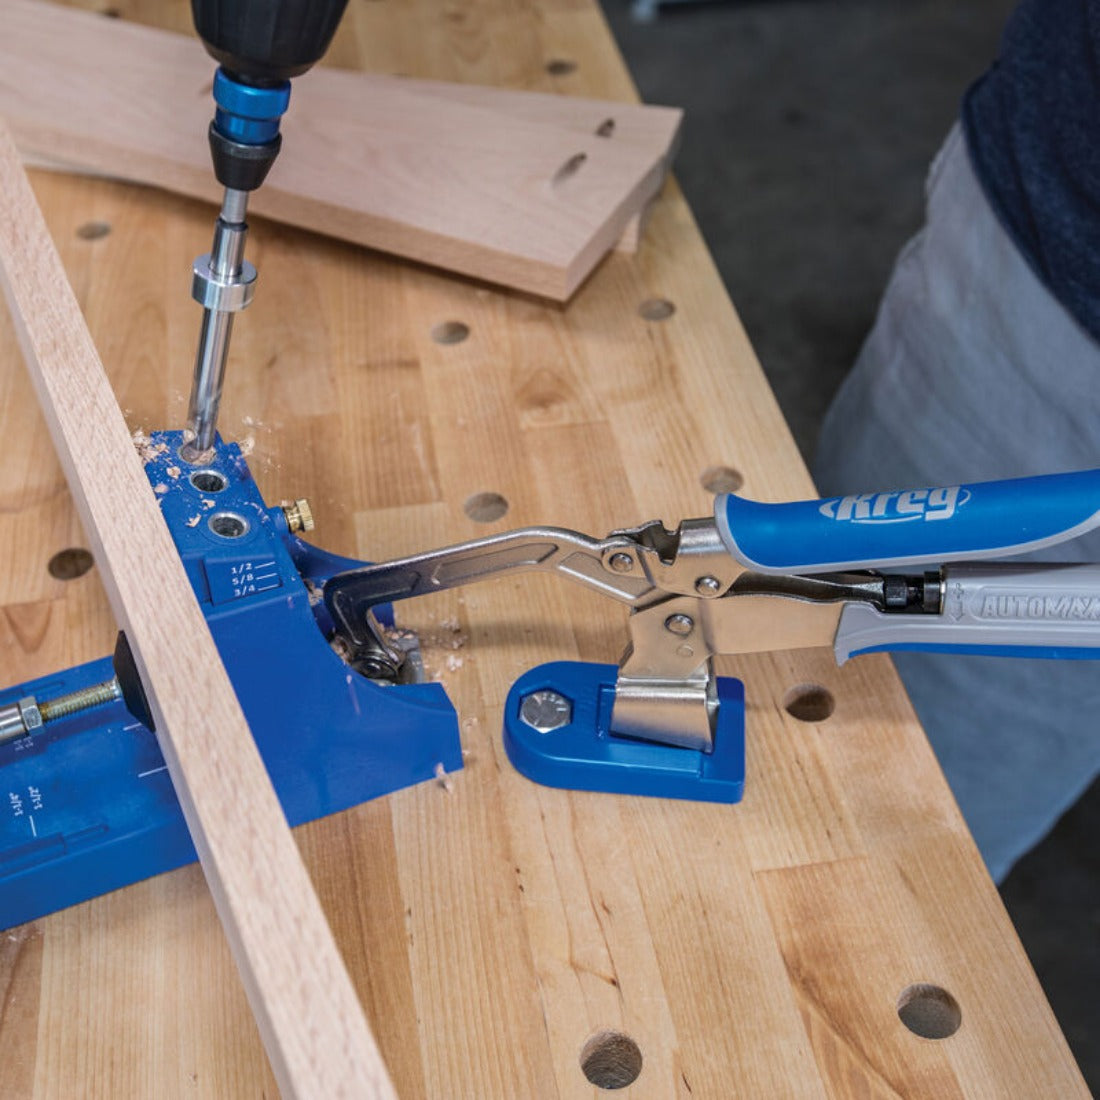 Kreg Bench Clamp with Bench Clamp Base image is showing K4 jig being held on a bench with the clamp 